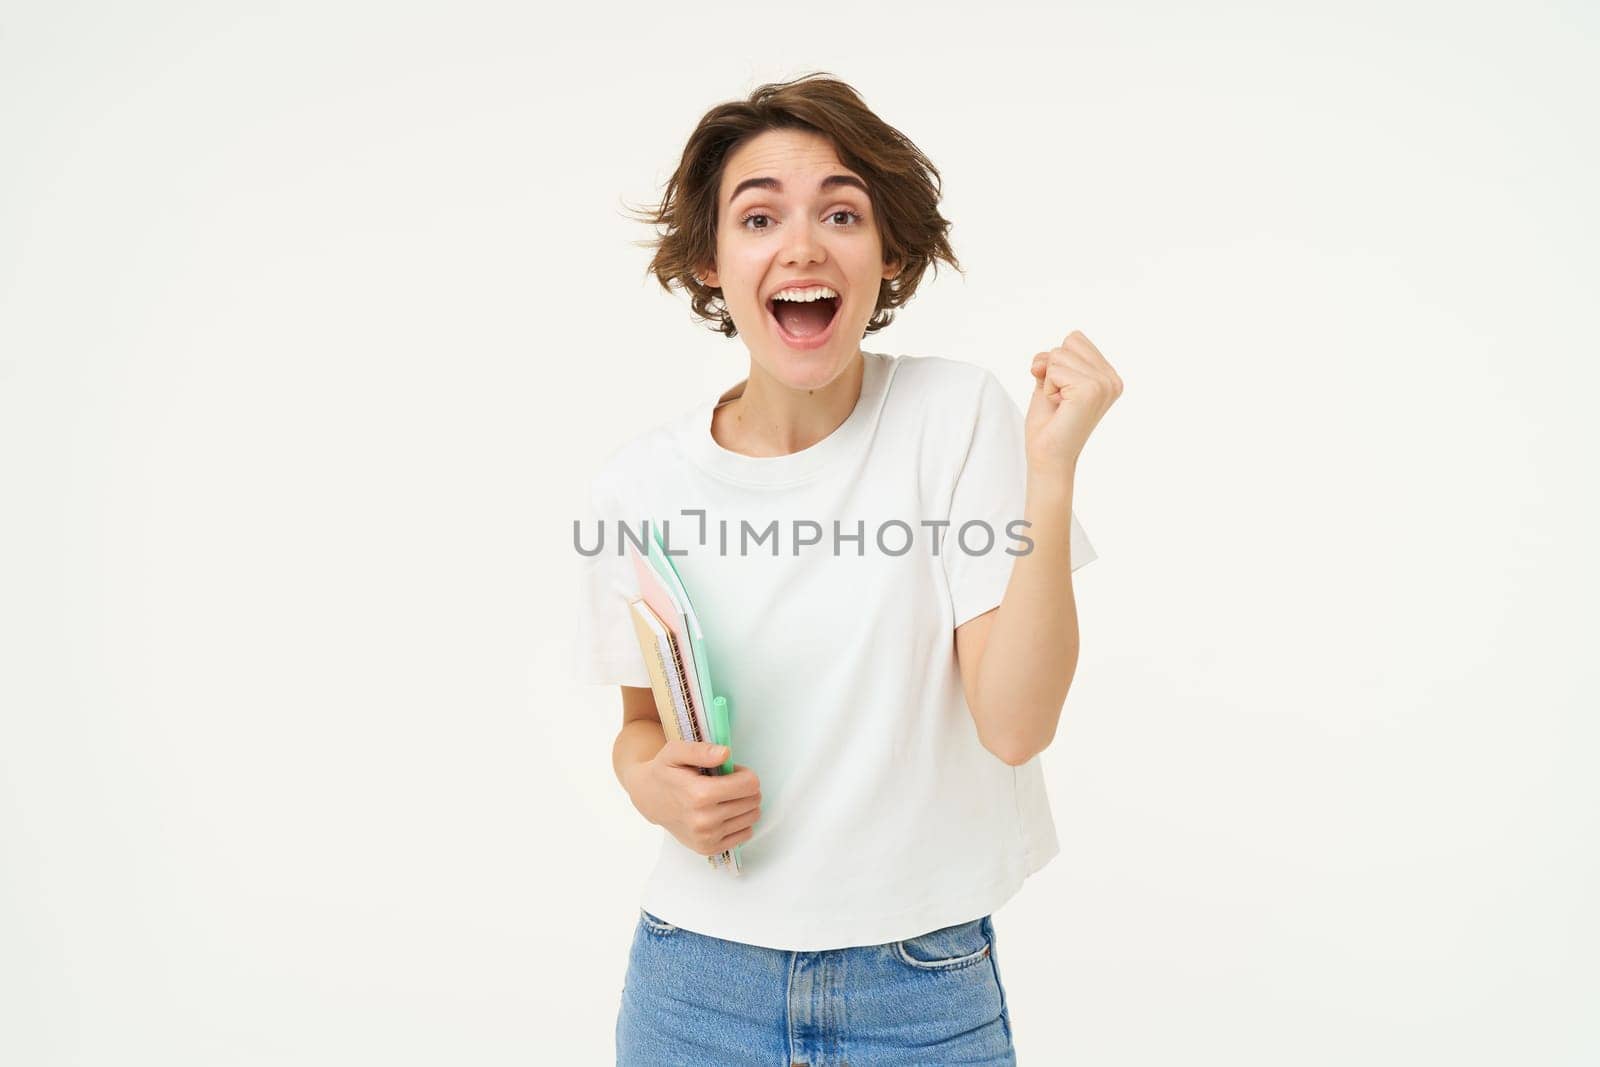 Enthusiastic brunette woman makes fist pump, holds documents and notes, looks thrilled and happy, winning, triumphing, posing over white background.